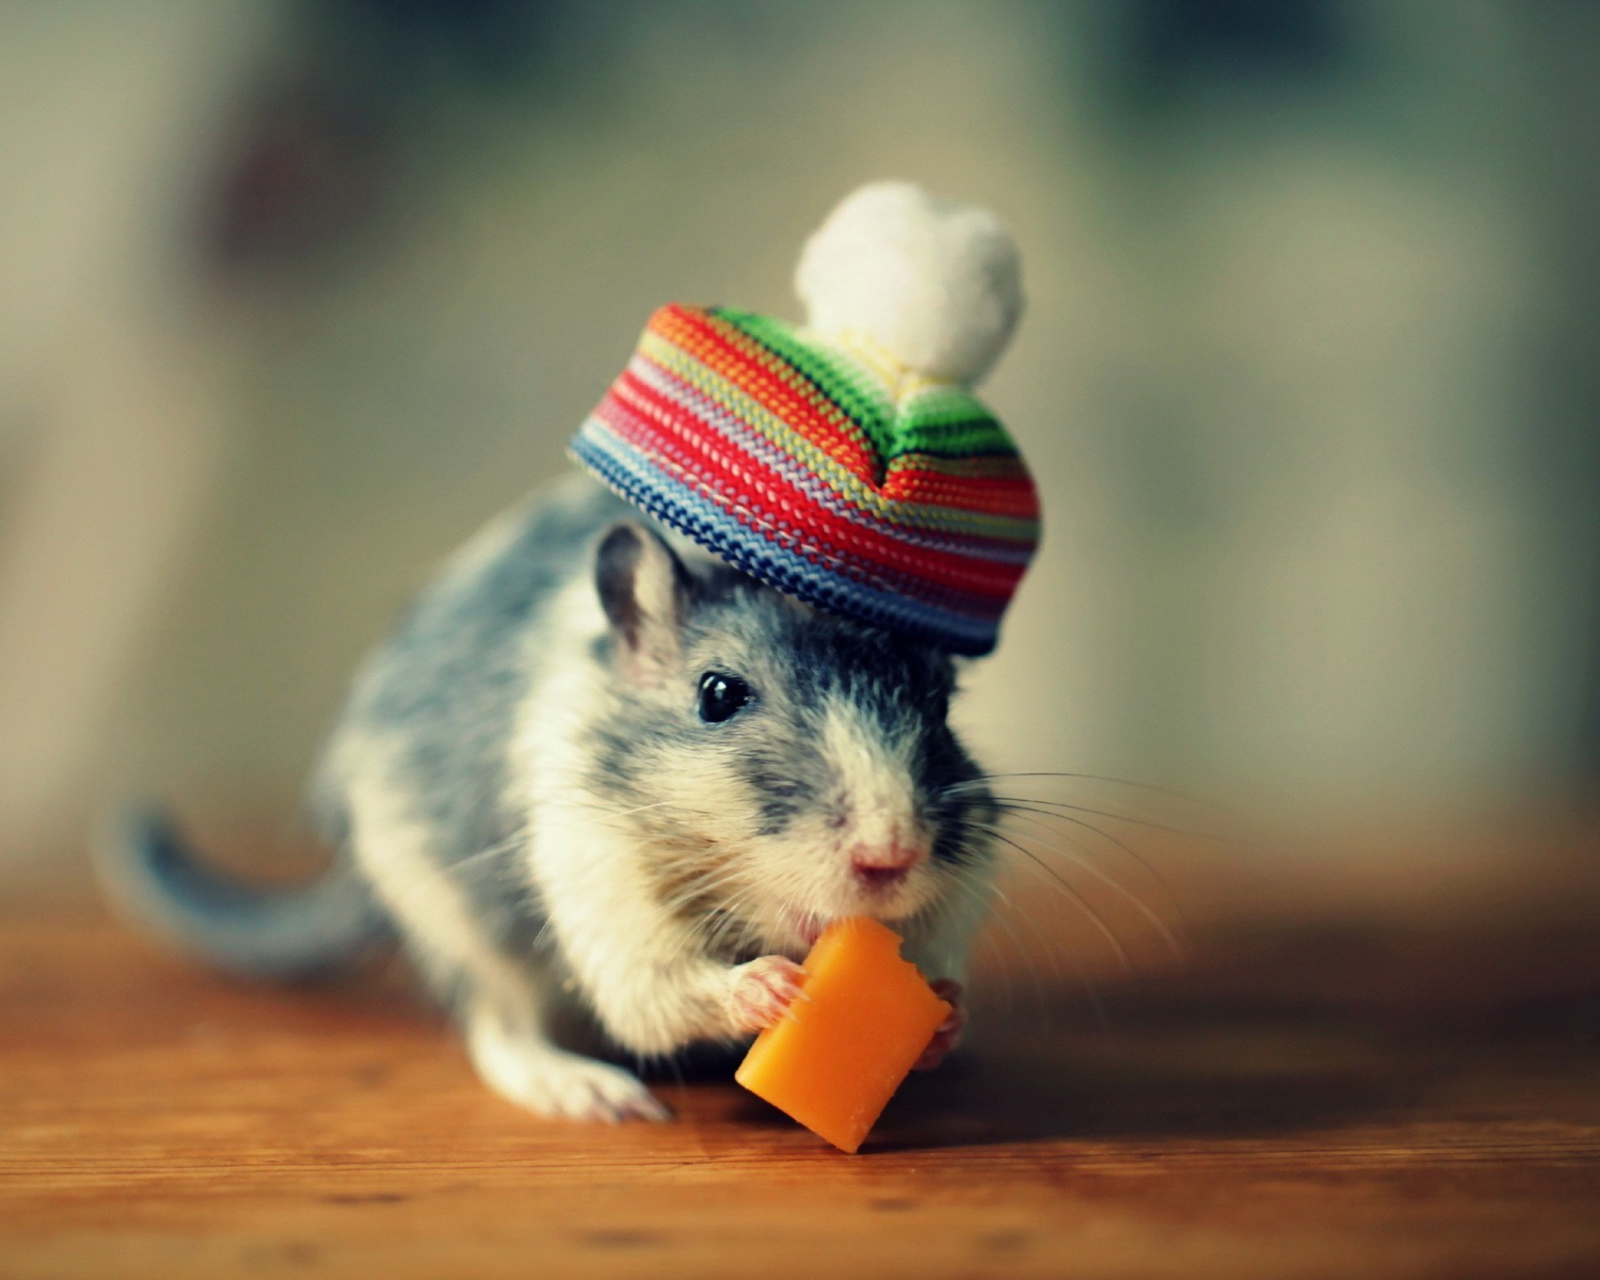 Sfondi Mouse In Funny Little Hat Eating Cheese 1600x1280